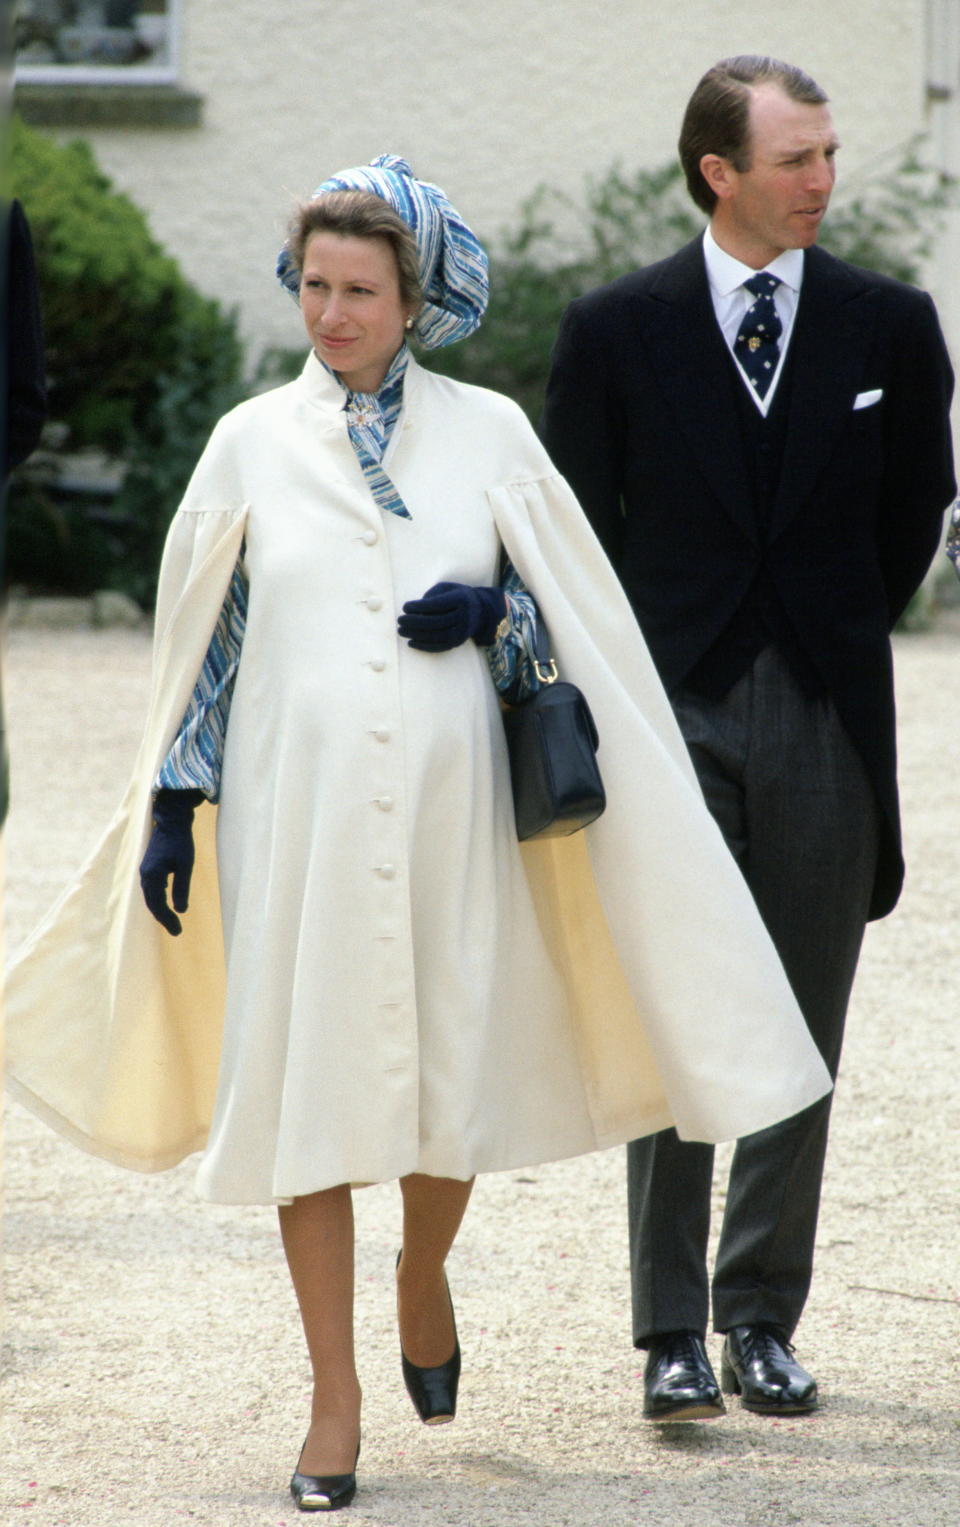 <p>In May 1981, Princess Anne and her then-husband Mark Phillips attended a close friend’s wedding. For the outing, Princess Anne dressed her bump in a Pinterest-worthy cape coat and ’80’s style headscarf. She was expecting daughter Zara Tindall at the time. <em>[Photo: Getty]</em> </p>